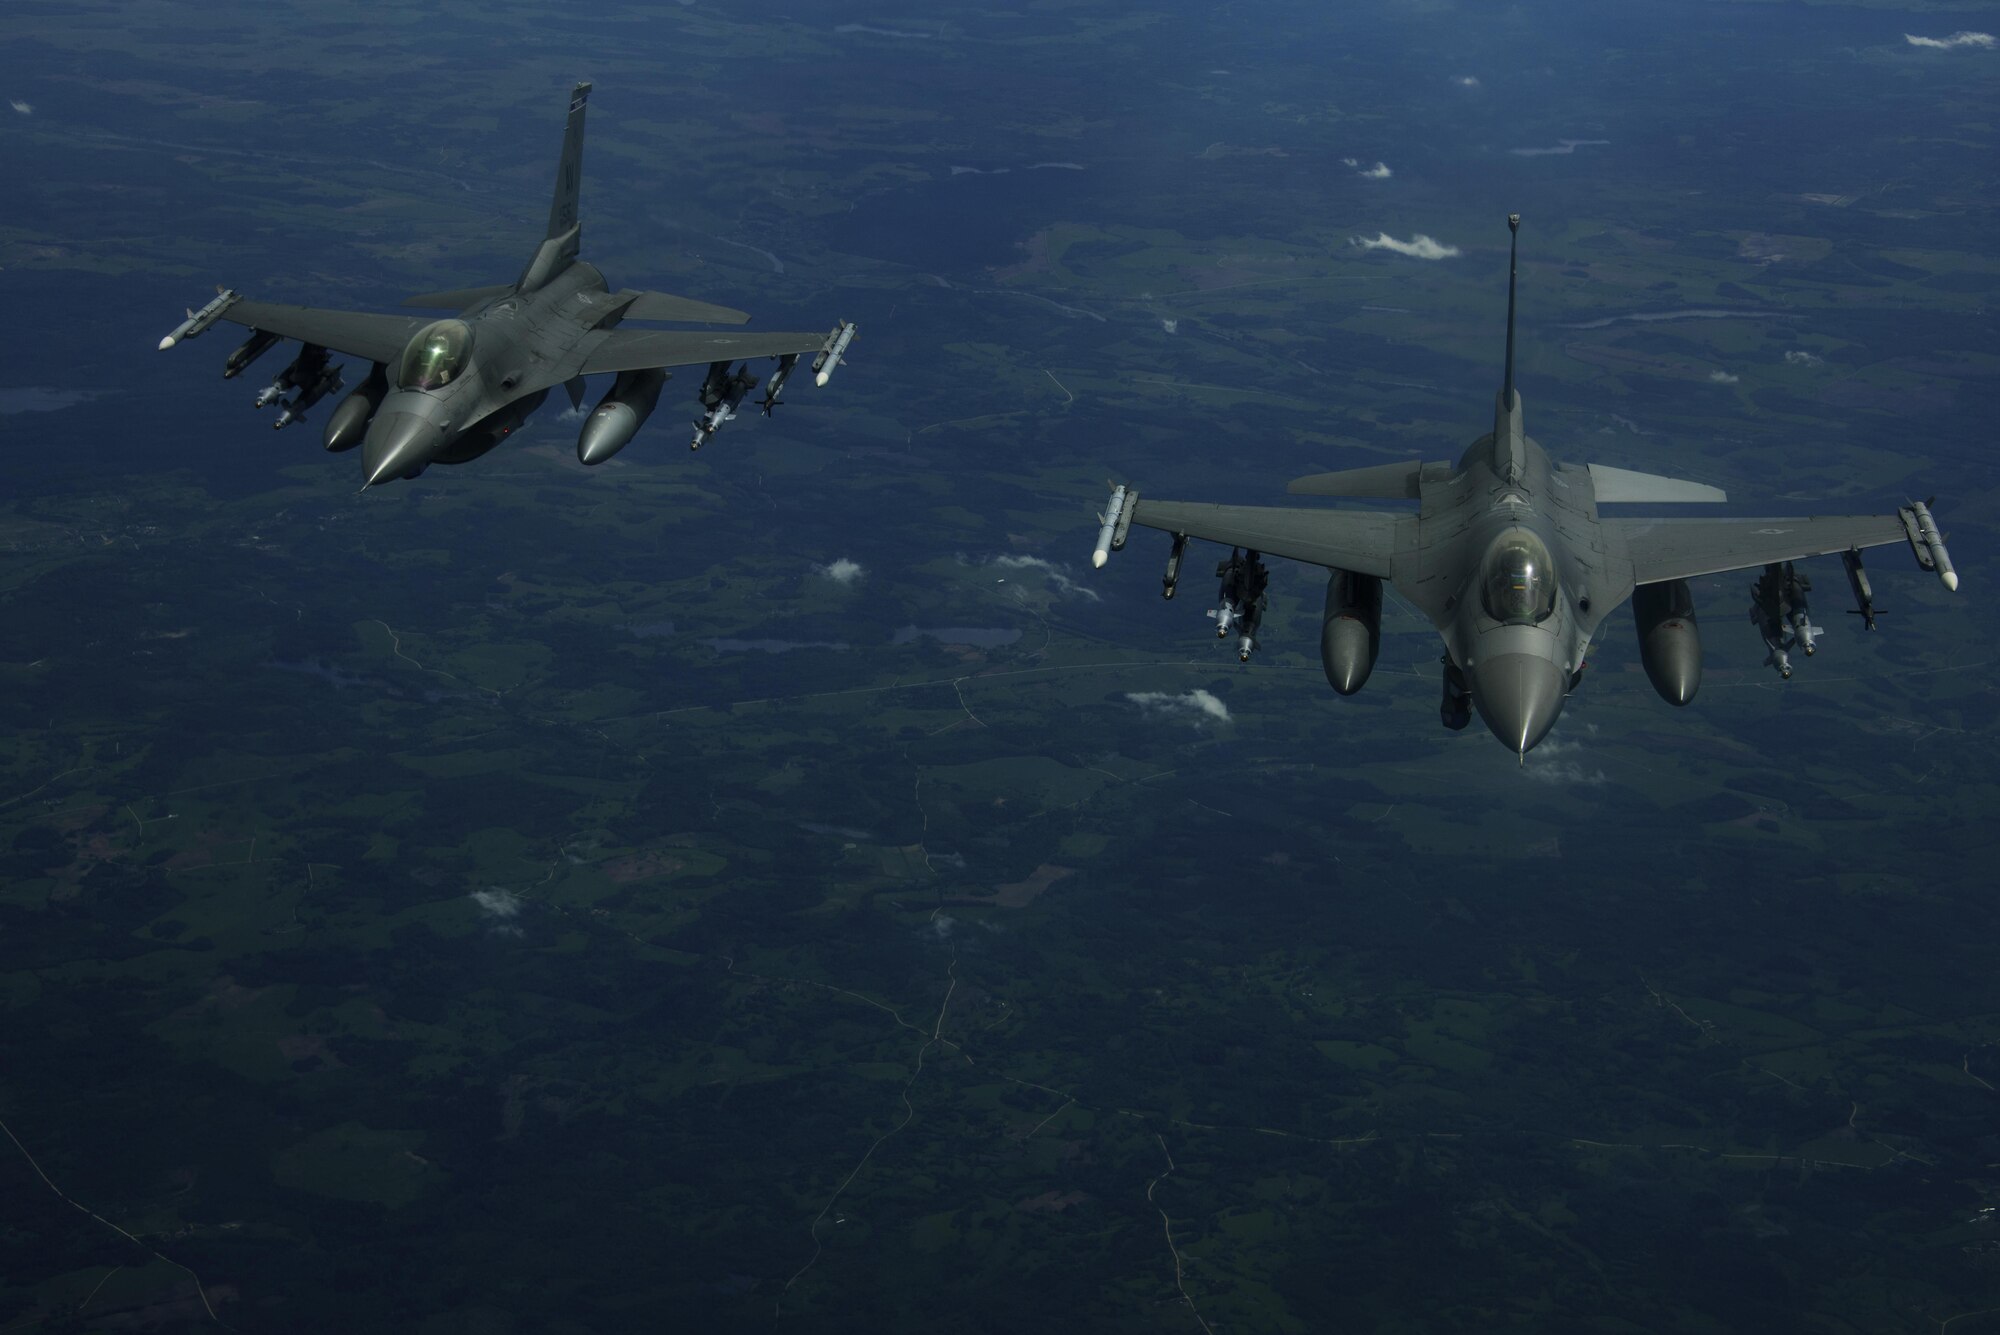 Two F-16 Fighting Falcons, 510th Fighter Squadron, are deployed to Krzesiny Air Base, Poland, in support of
Aviation Detachment rotation 17-3, exercise BALTOPS and exercise Saber Strike fly over Latvia, June 7, 2017. BALTOPS is an annually recurring multinational exercise designed to enhance flexibility and interoperability, as well
as demonstrate resolve of allied and partner forces to defend the Baltic region. Participating nations include Belgium, Denmark, Estonia, Finland, France, Germany, Latvia, Lithuania, the Netherlands, Norway, Poland, Sweden, the United Kingdom, and the United States. (U.S. Air Force photo by Staff Sgt. Jonathan Snyder)